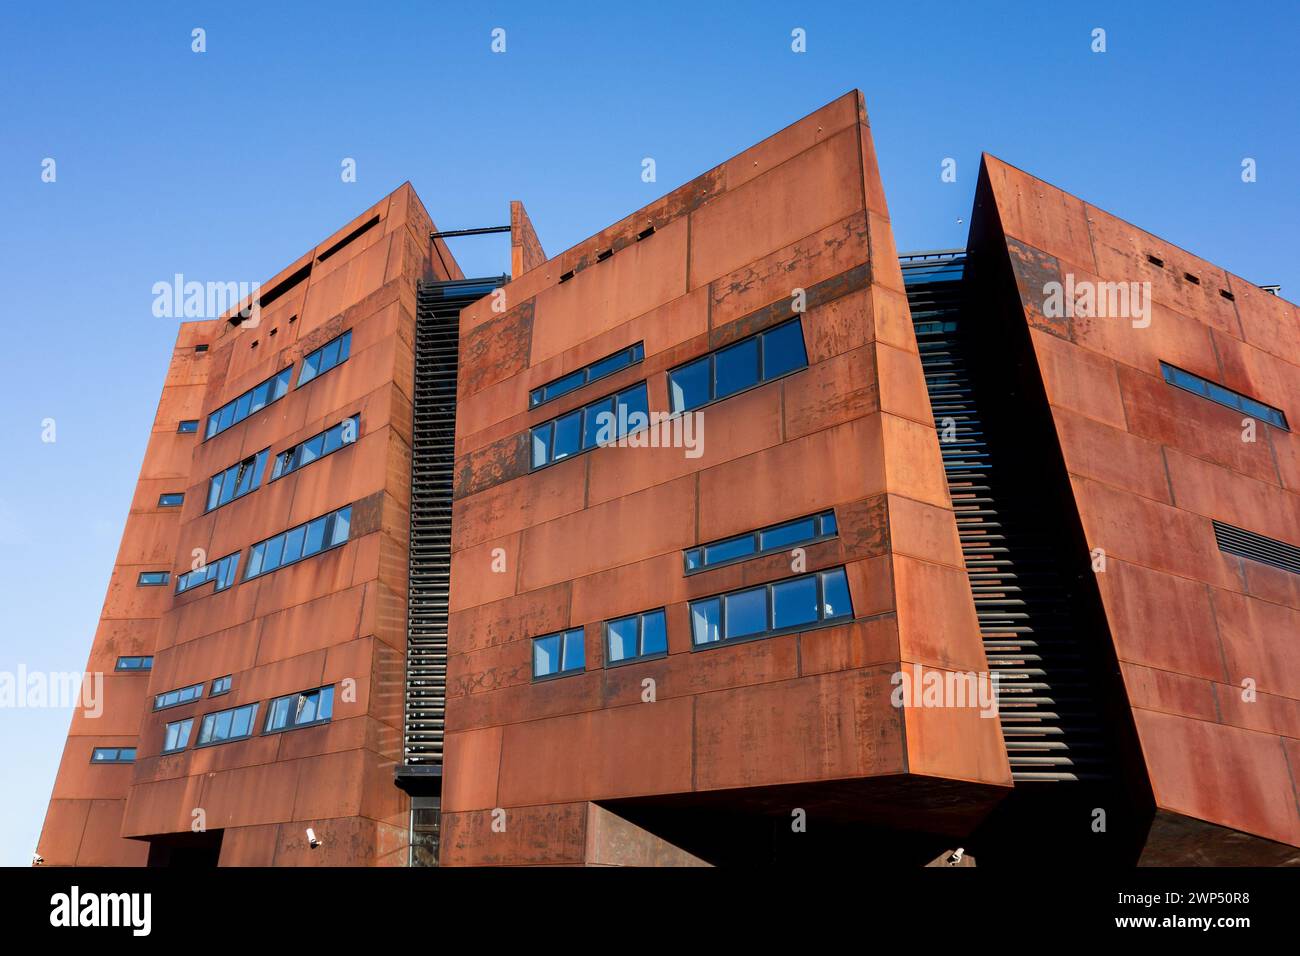 GDANSK, POLAND - AUGUST 18, 2015: Building of European Solidarity Centre in Gdansk, Poland that was opened in 2014. Stock Photo